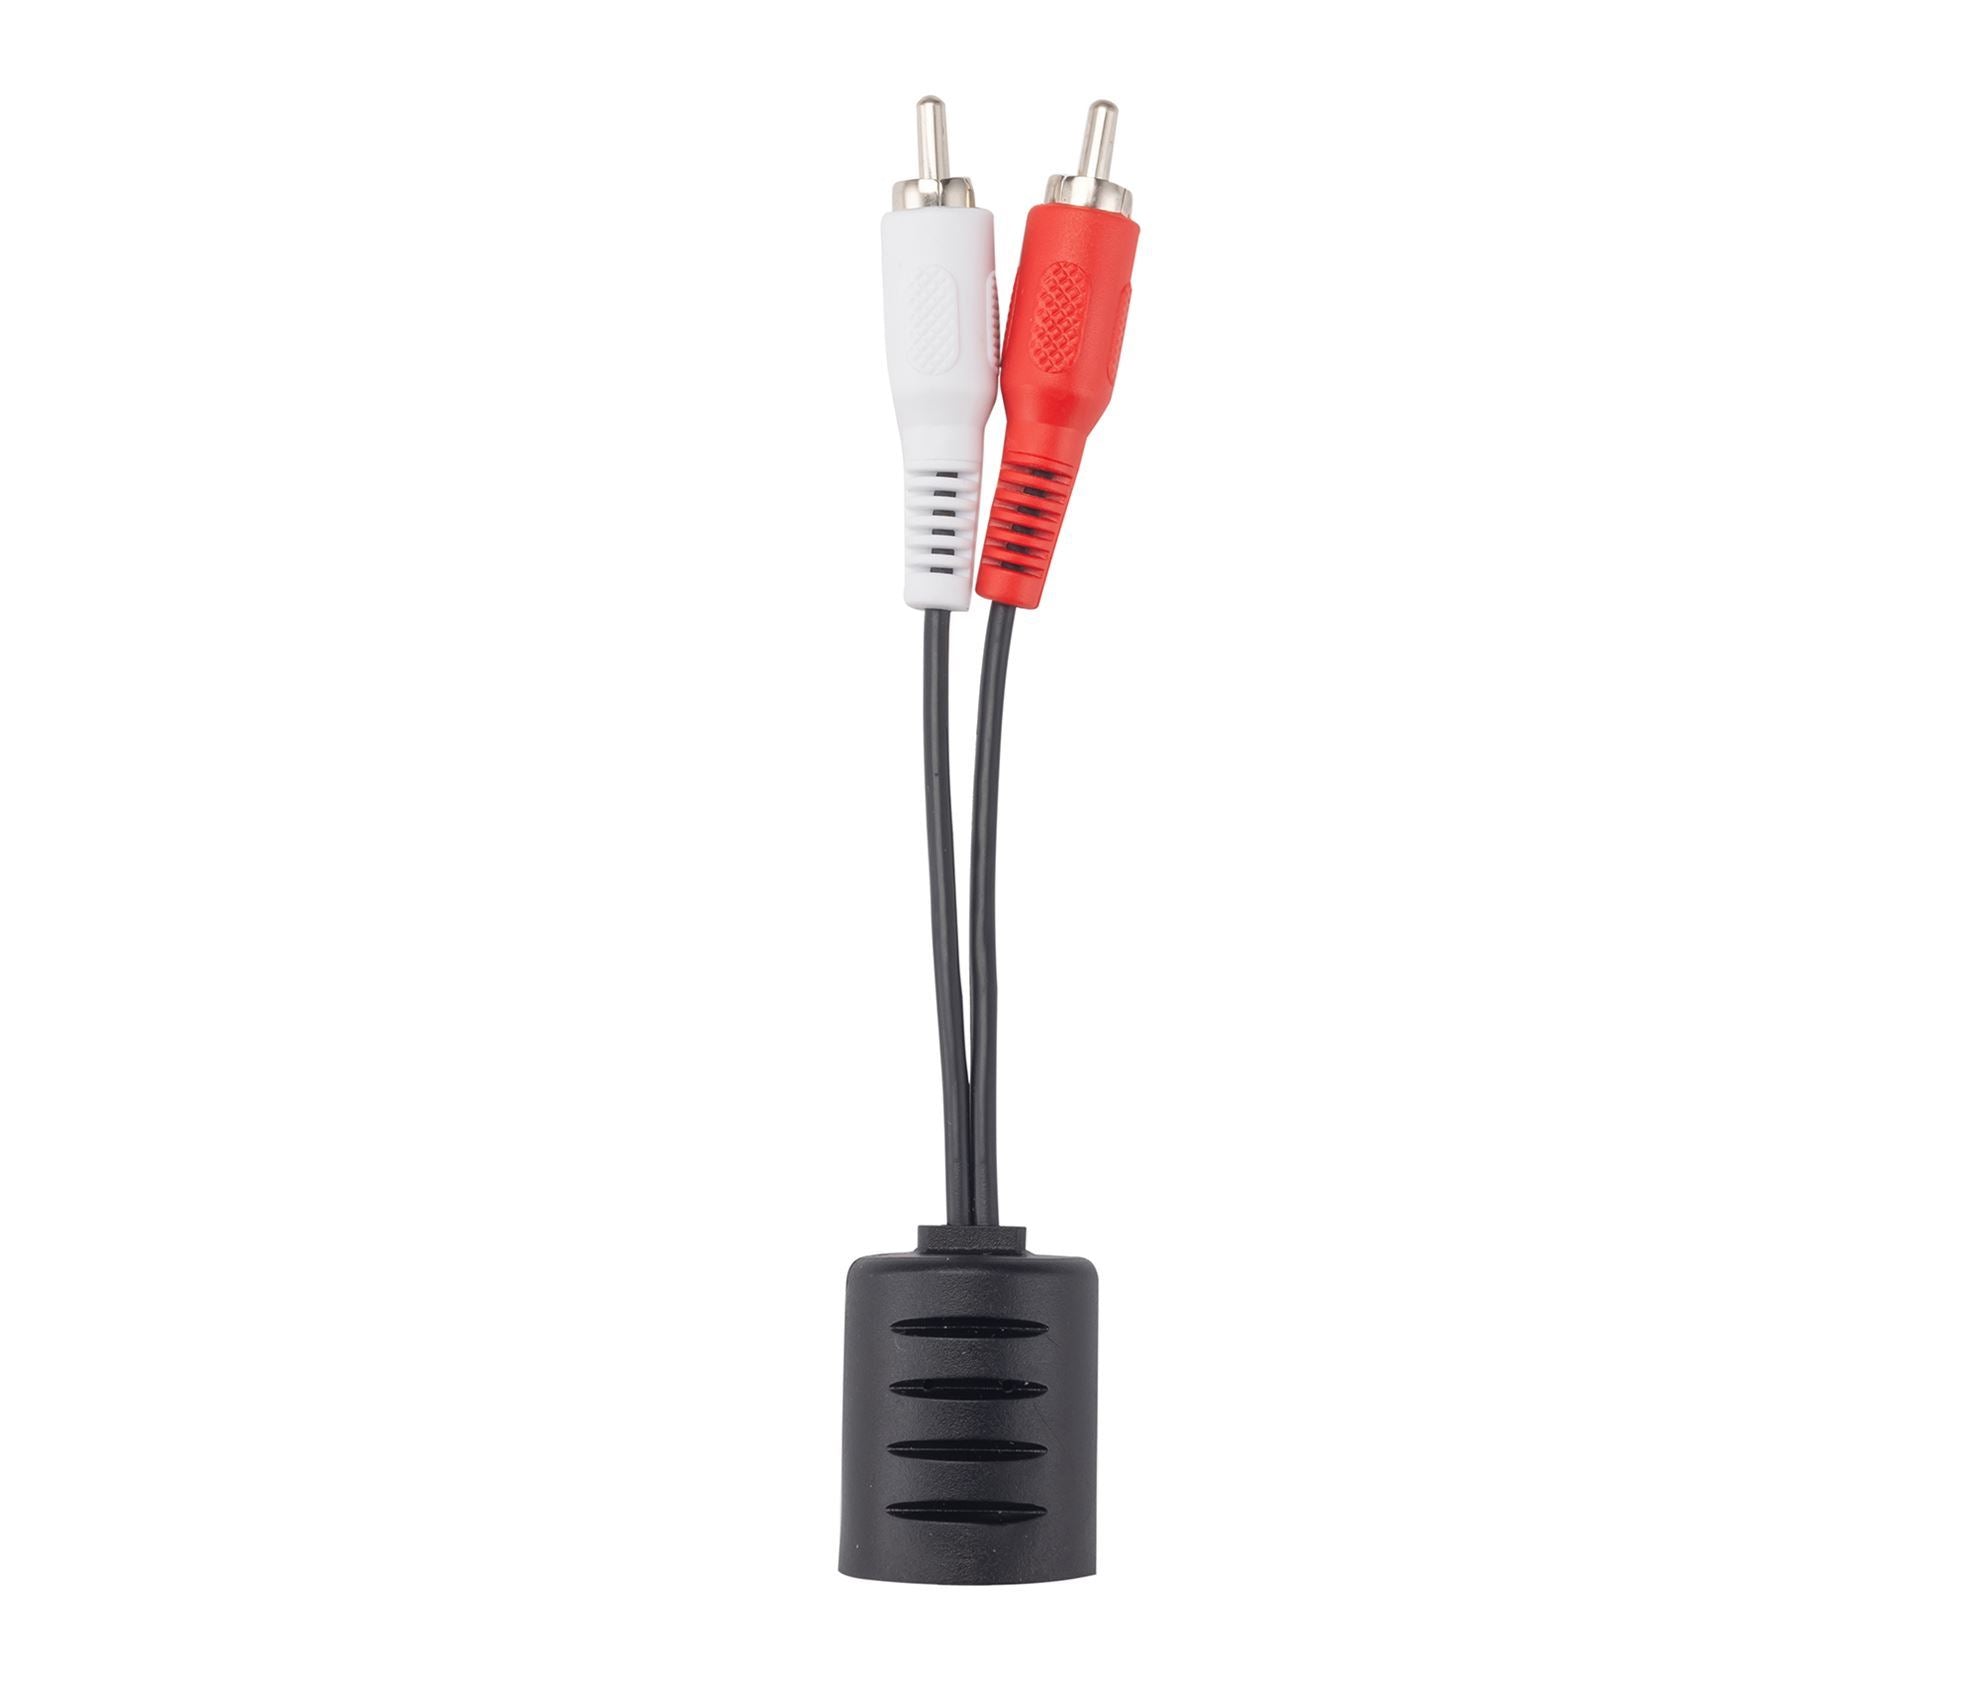 DYNAMIX_Stereo_Audio_Connector_to_RJ45_Balun_&_2x_RCA_Connectors_to_RJ45_Balun._Max_Distance_50m,_Sold_as_a_Pair. 171